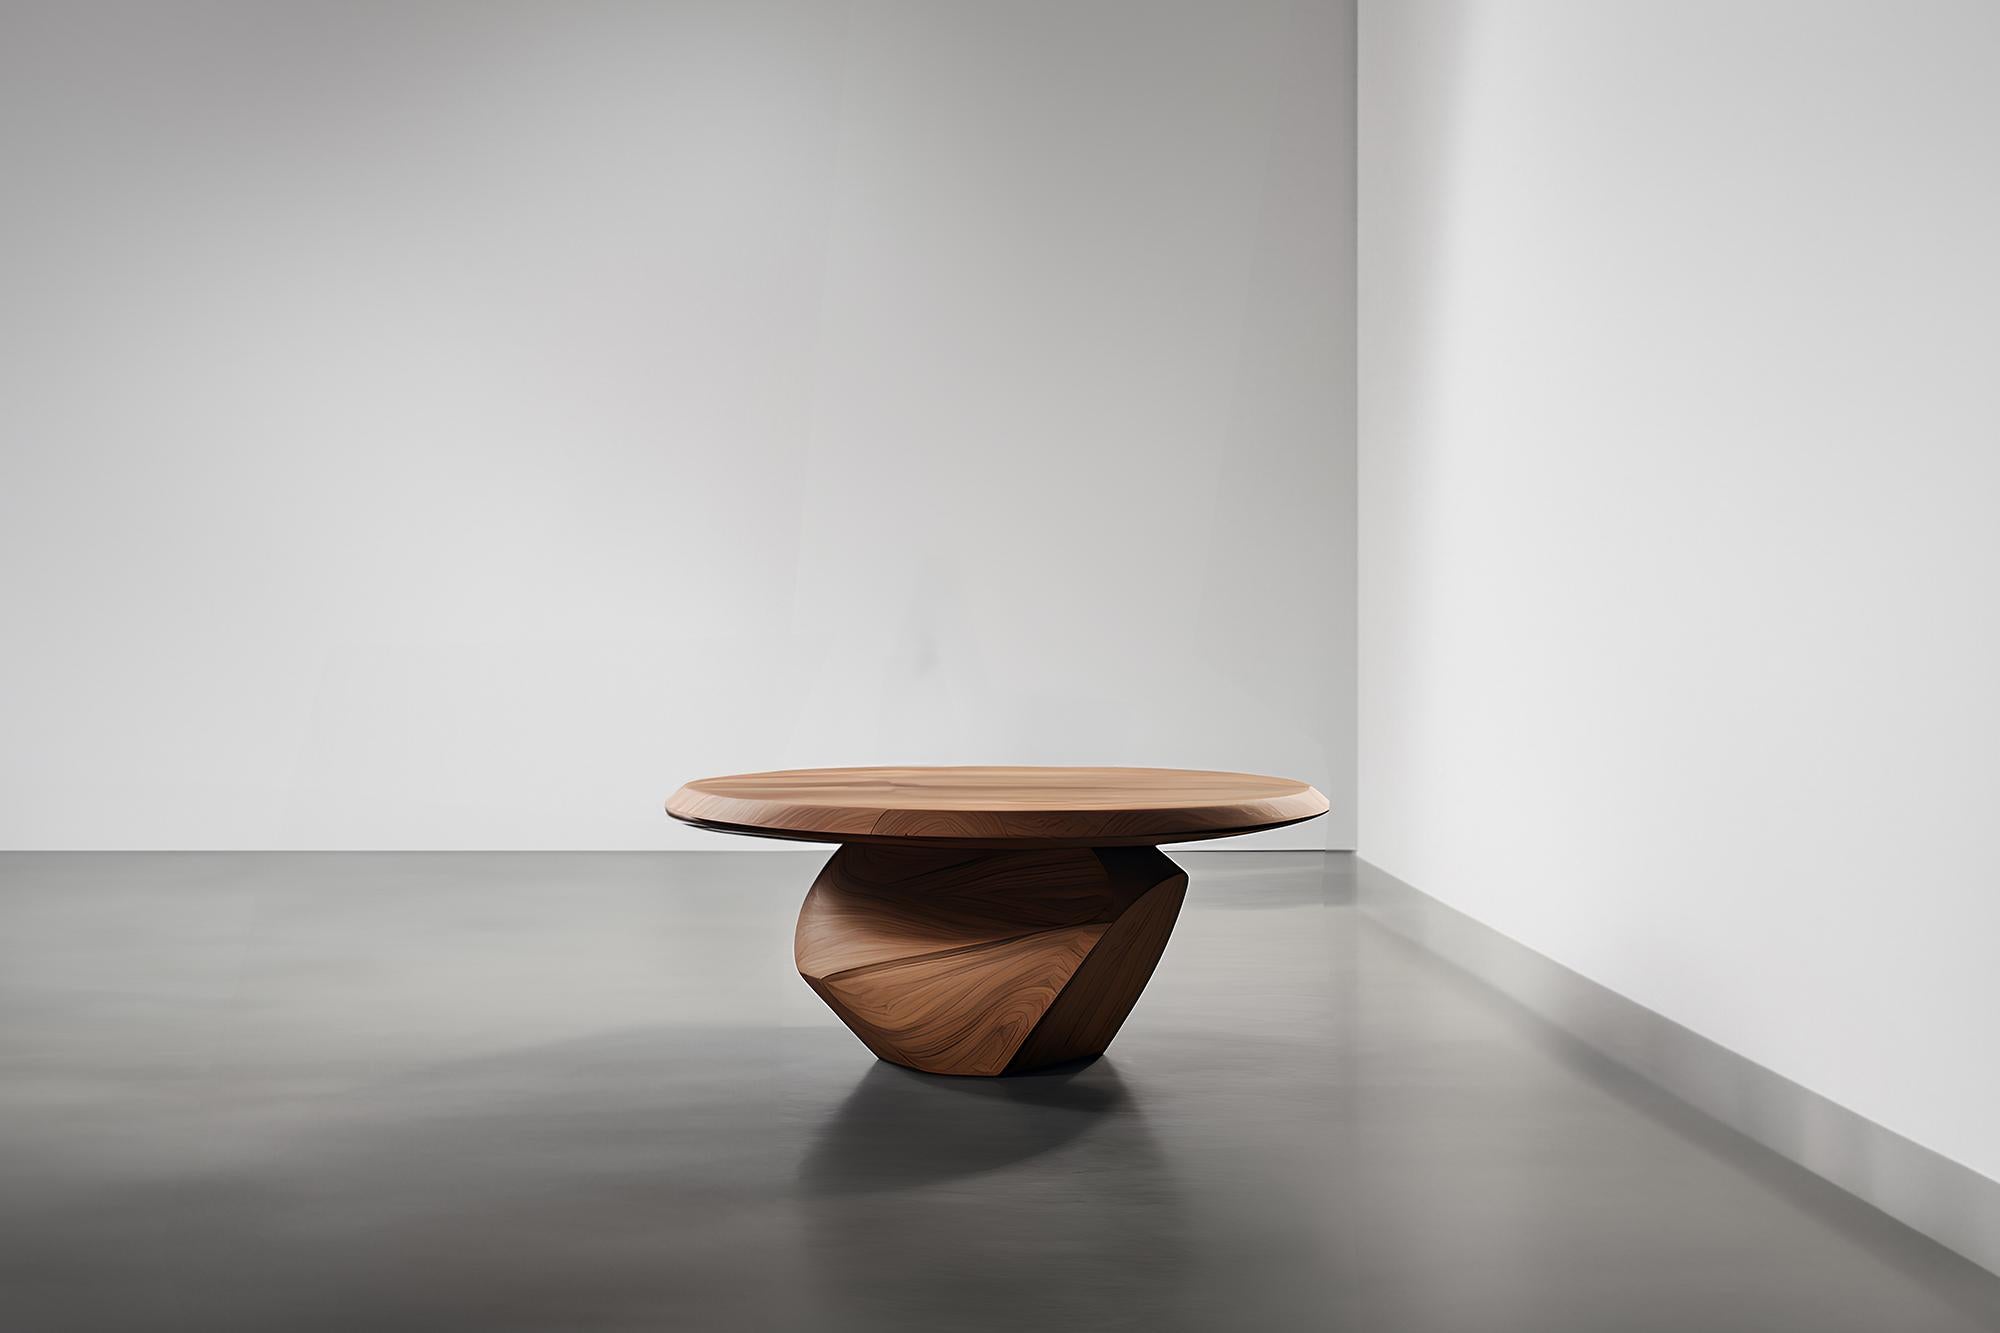 Sculptural Coffee Table Made of Solid Wood, Center Table Solace S36 by Joel Escalona


The Solace table series, designed by Joel Escalona, is a furniture collection that exudes balance and presence, thanks to its sensuous, dense, and irregular